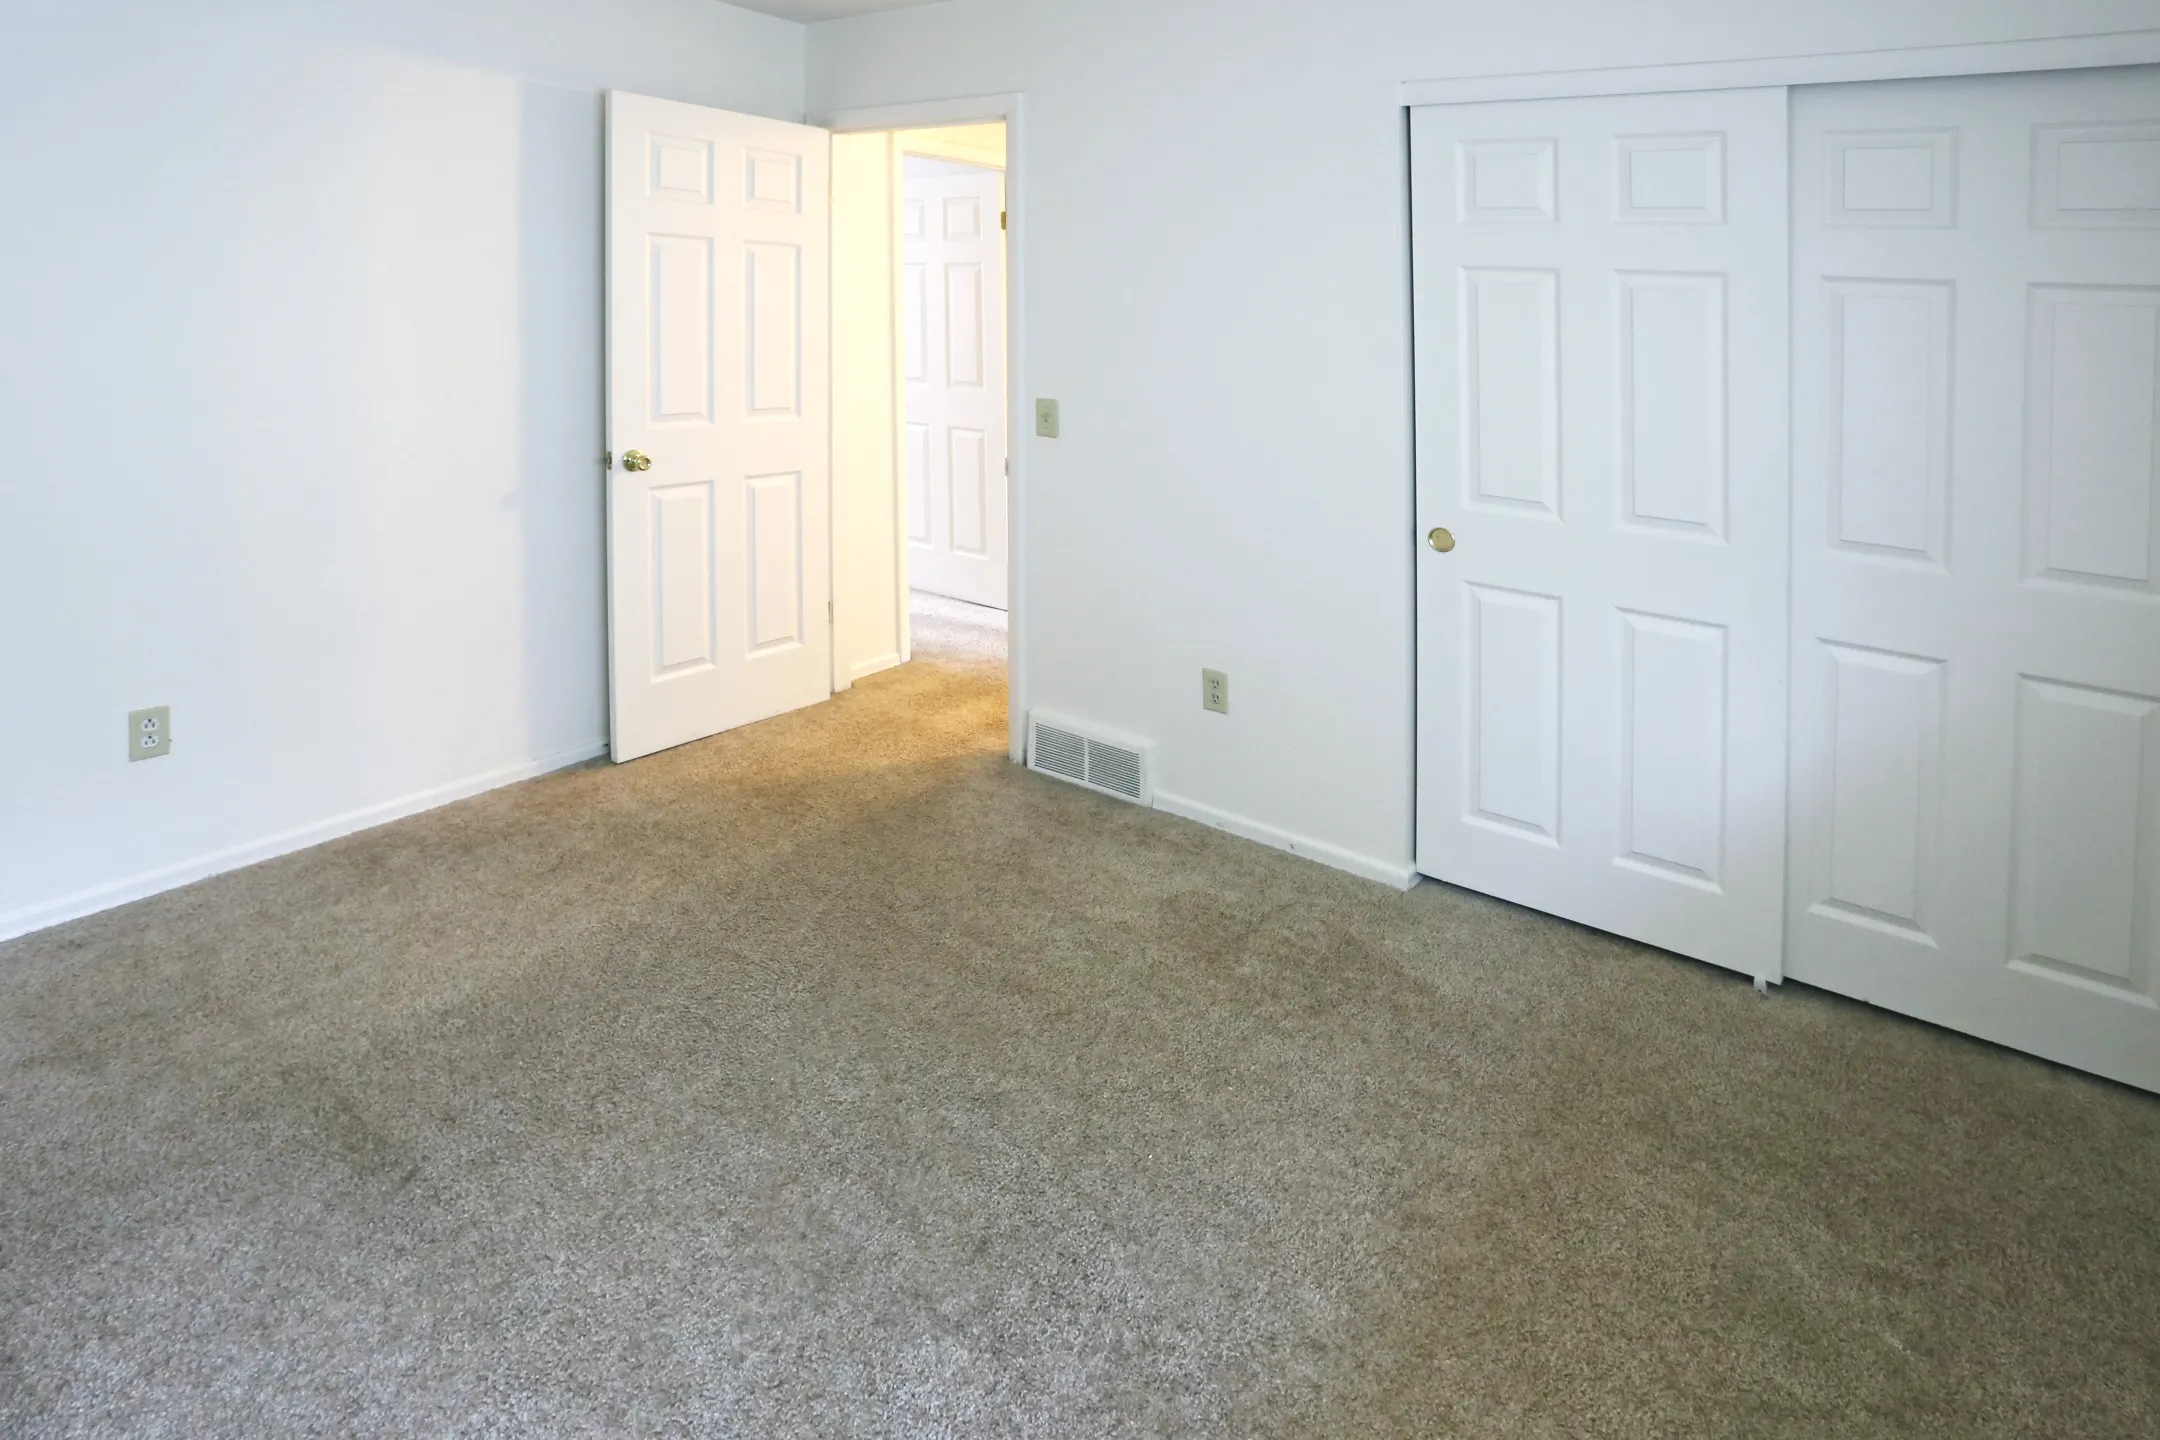 Bedroom - Westbrooke Commons - Rochester, NY